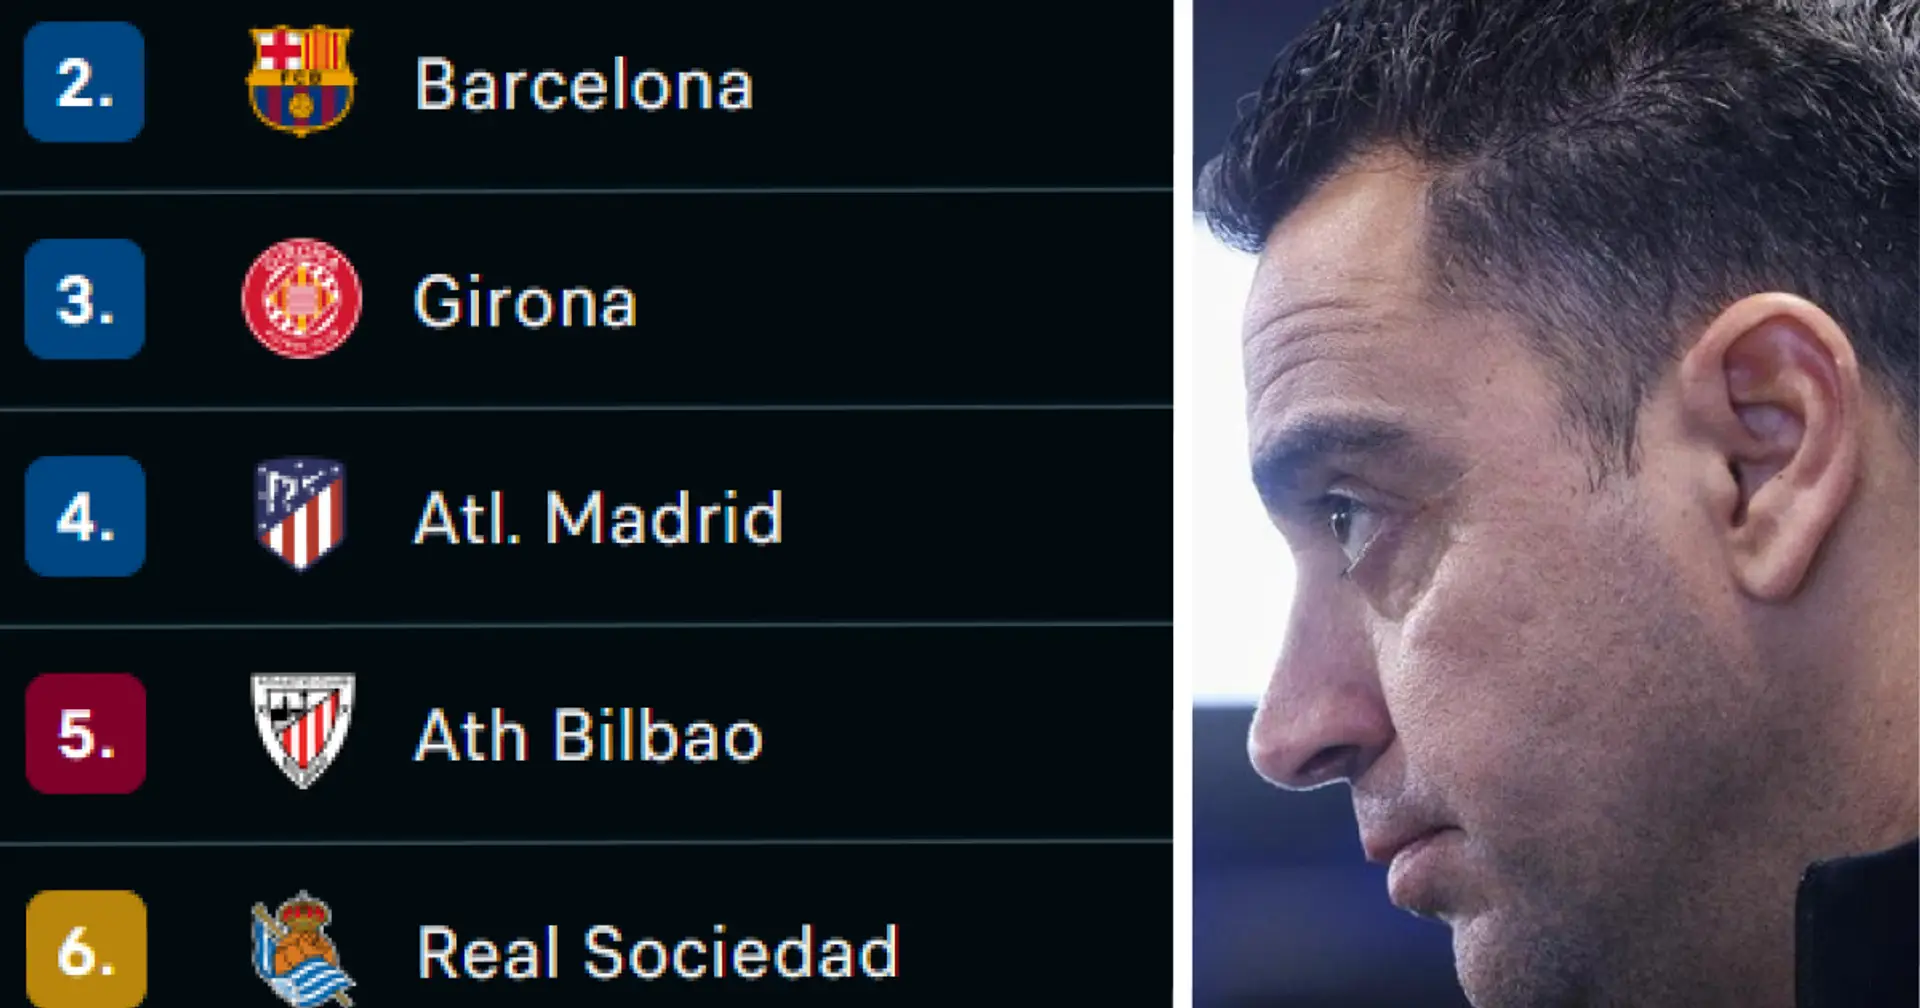 La Liga standings after Cadiz win show what Barca needs to retain title